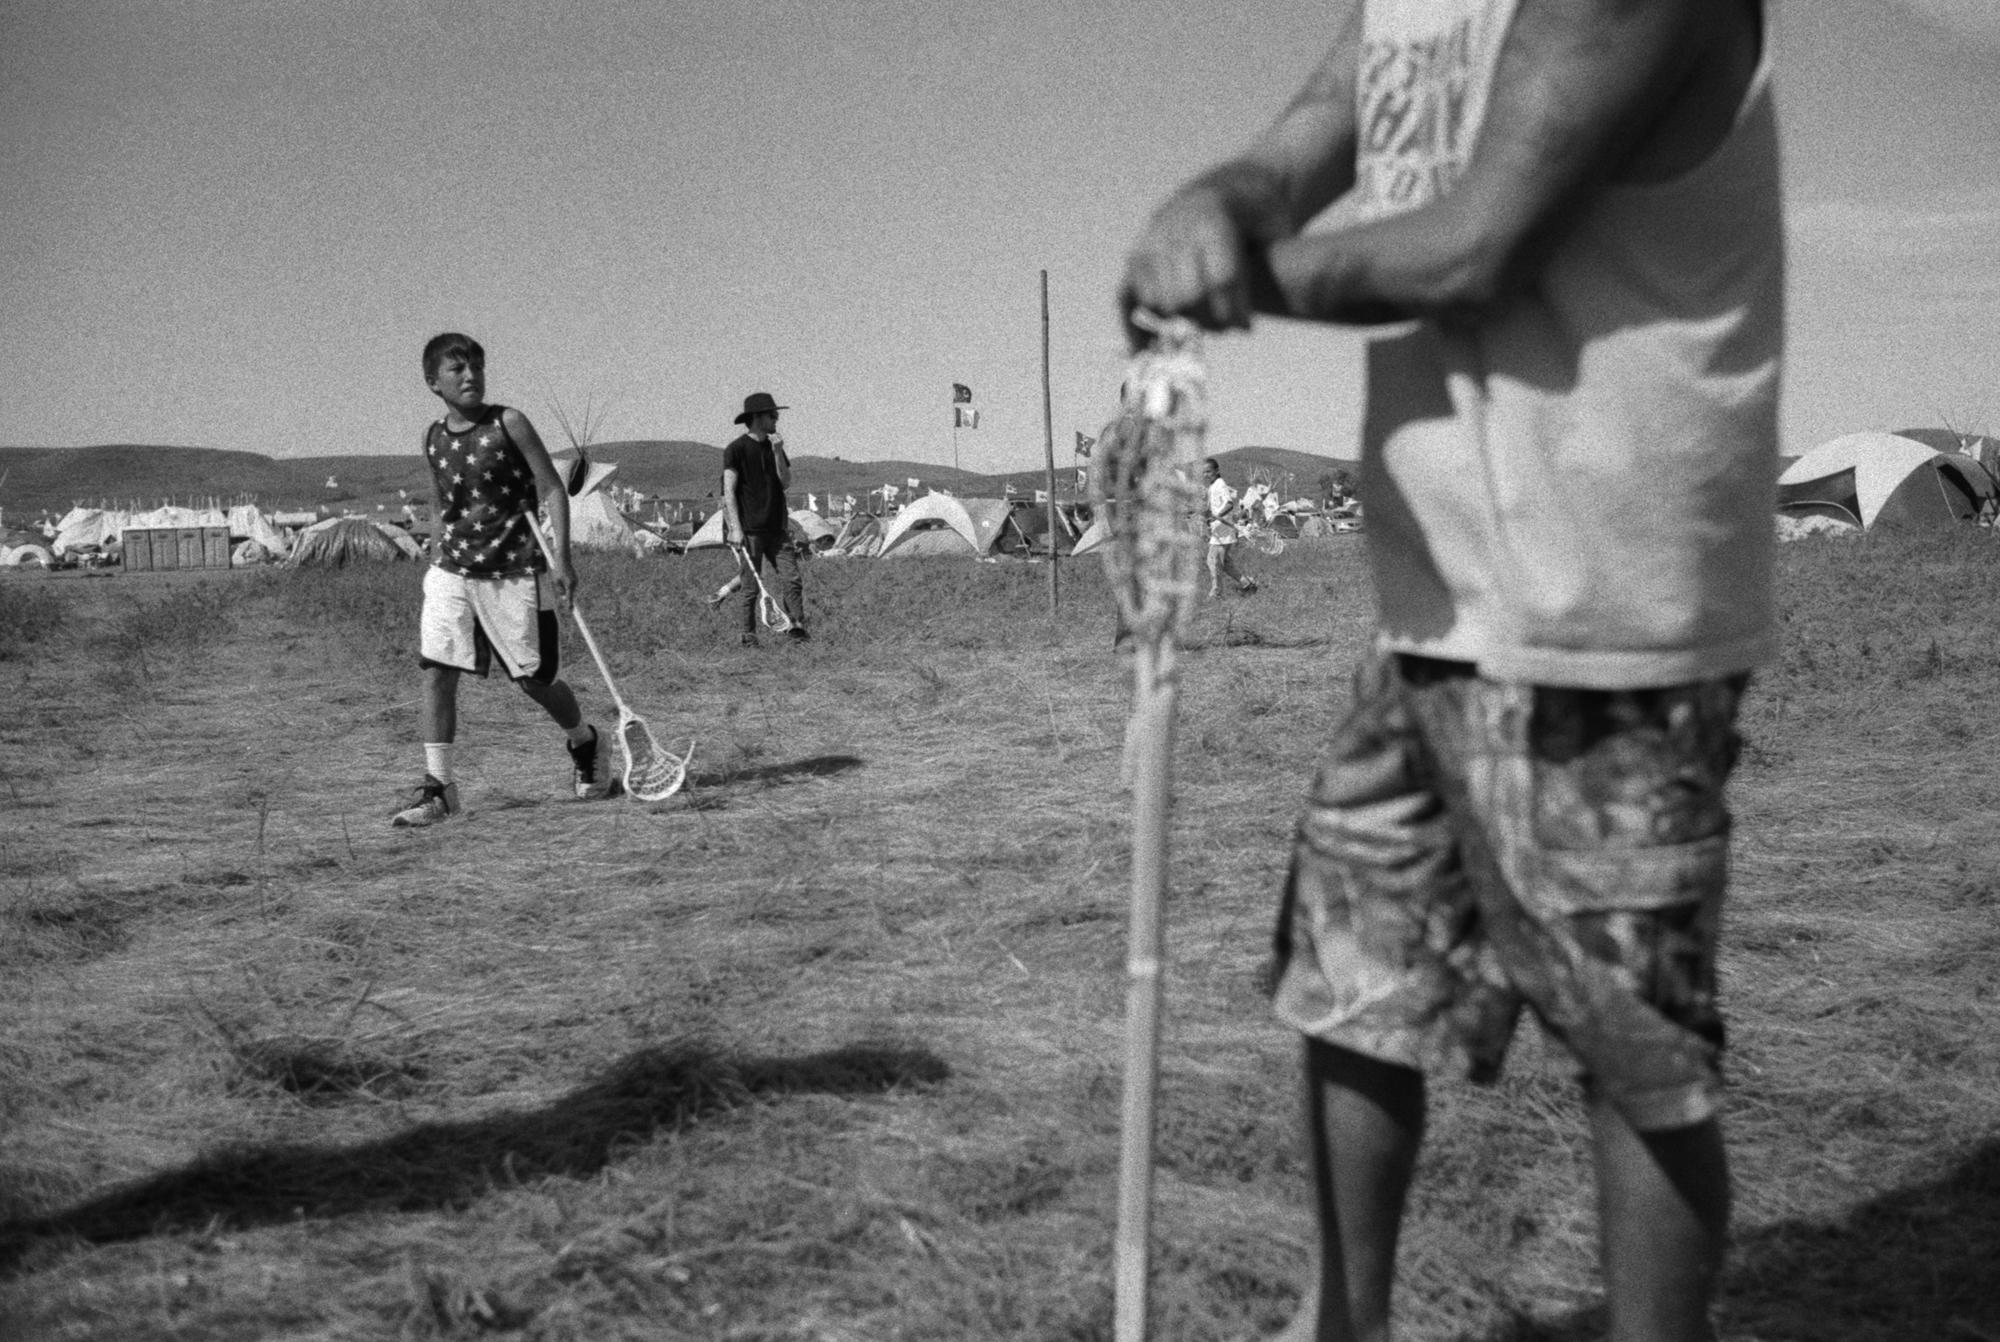 Standing Rock - Playing lacrosse on a sunny day in the Oceti Sakowin...